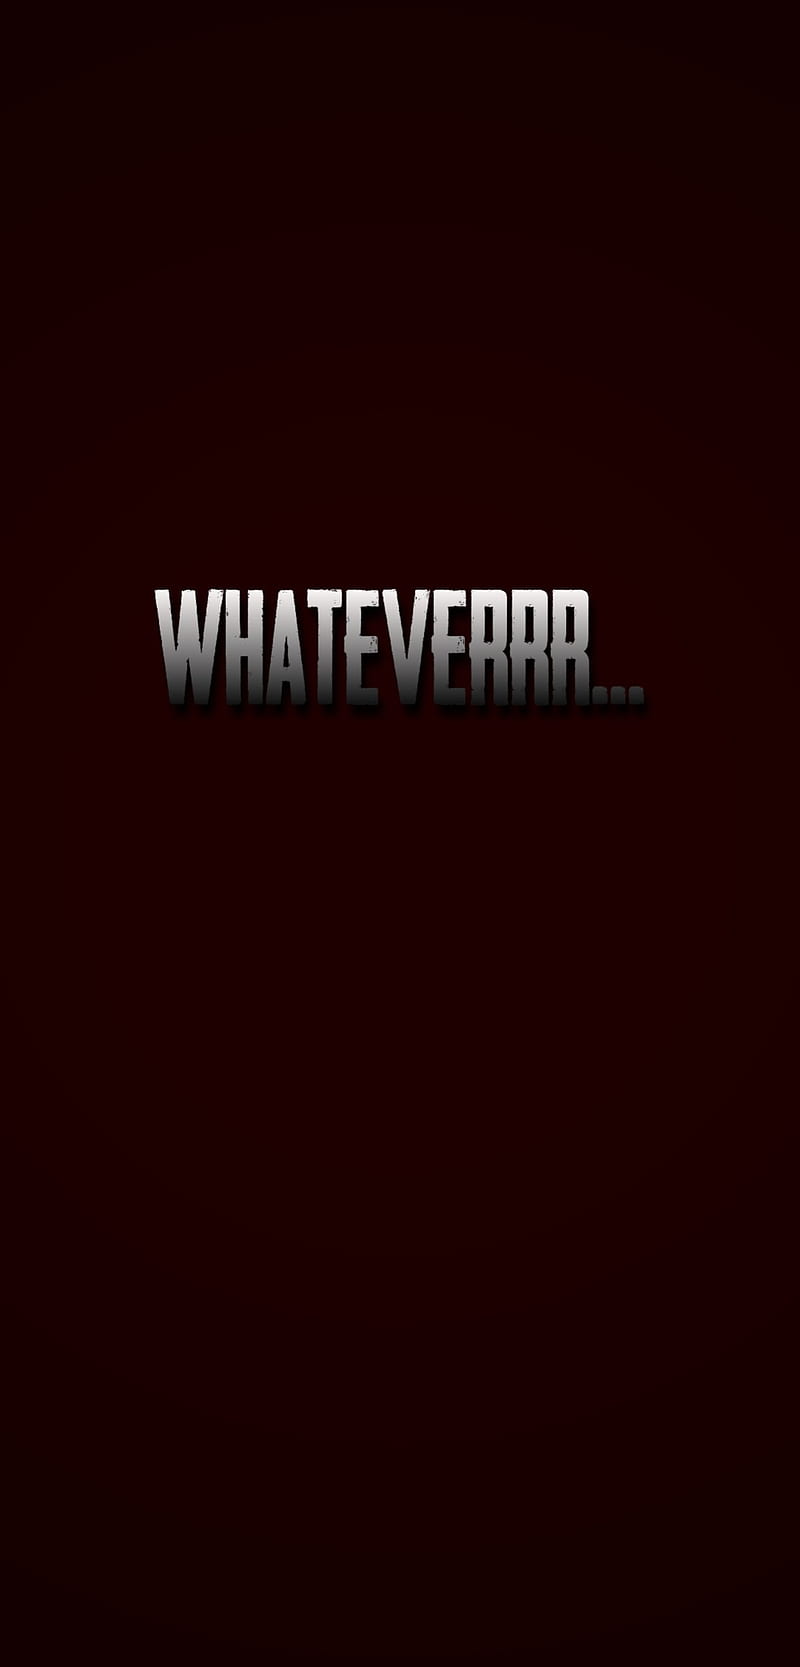 Whatever, ever, sayings, what, what so ever, HD phone wallpaper